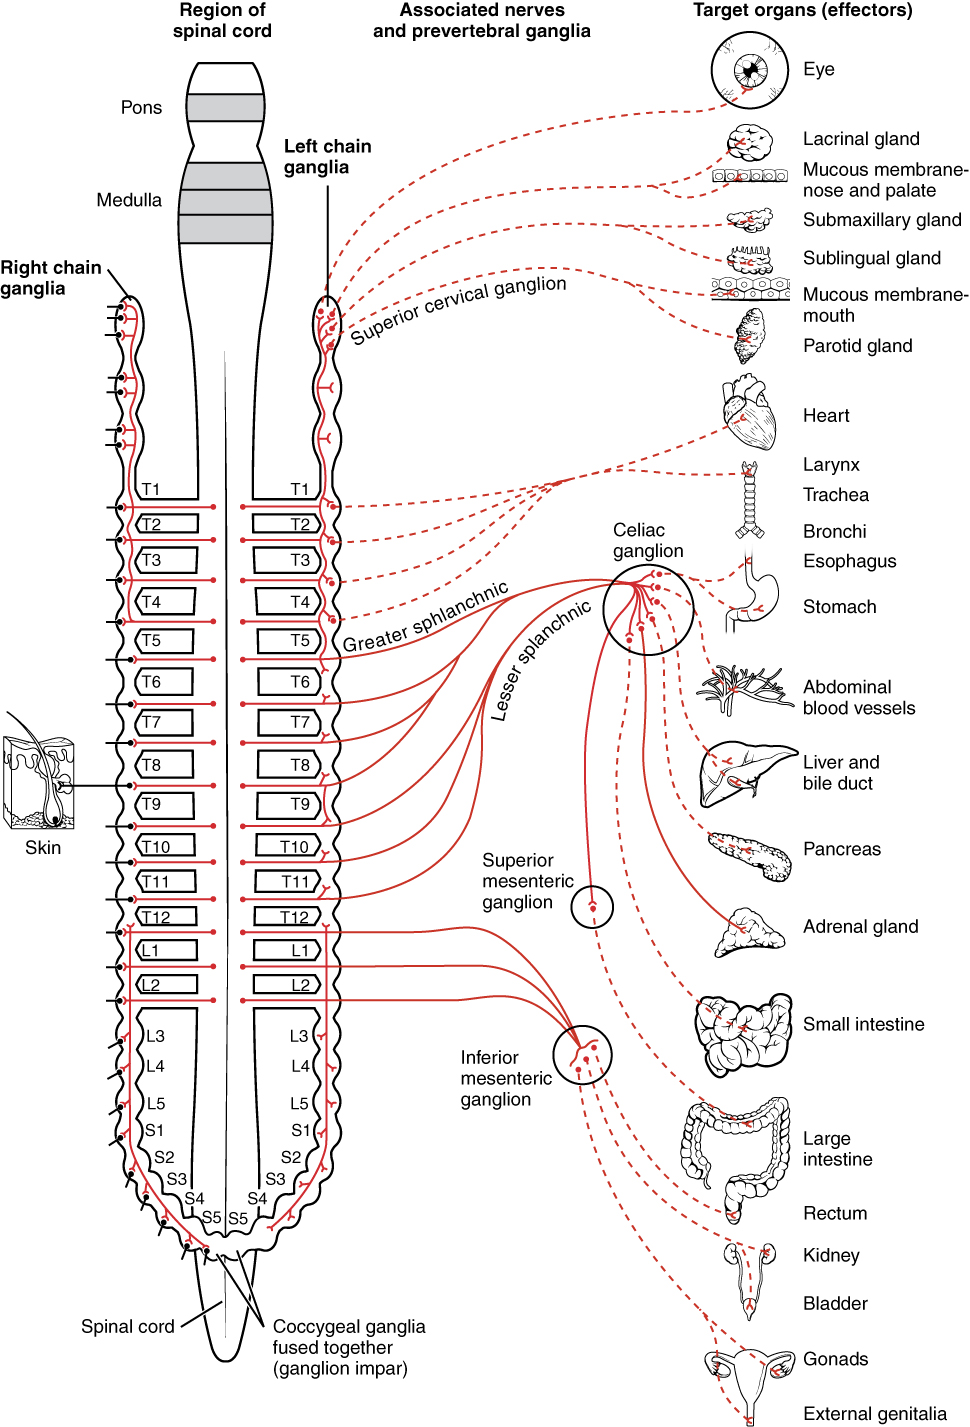 This diagram shows the spinal cord, and the connections from the spinal cord to the different target organs. The target organs are listed on the right.